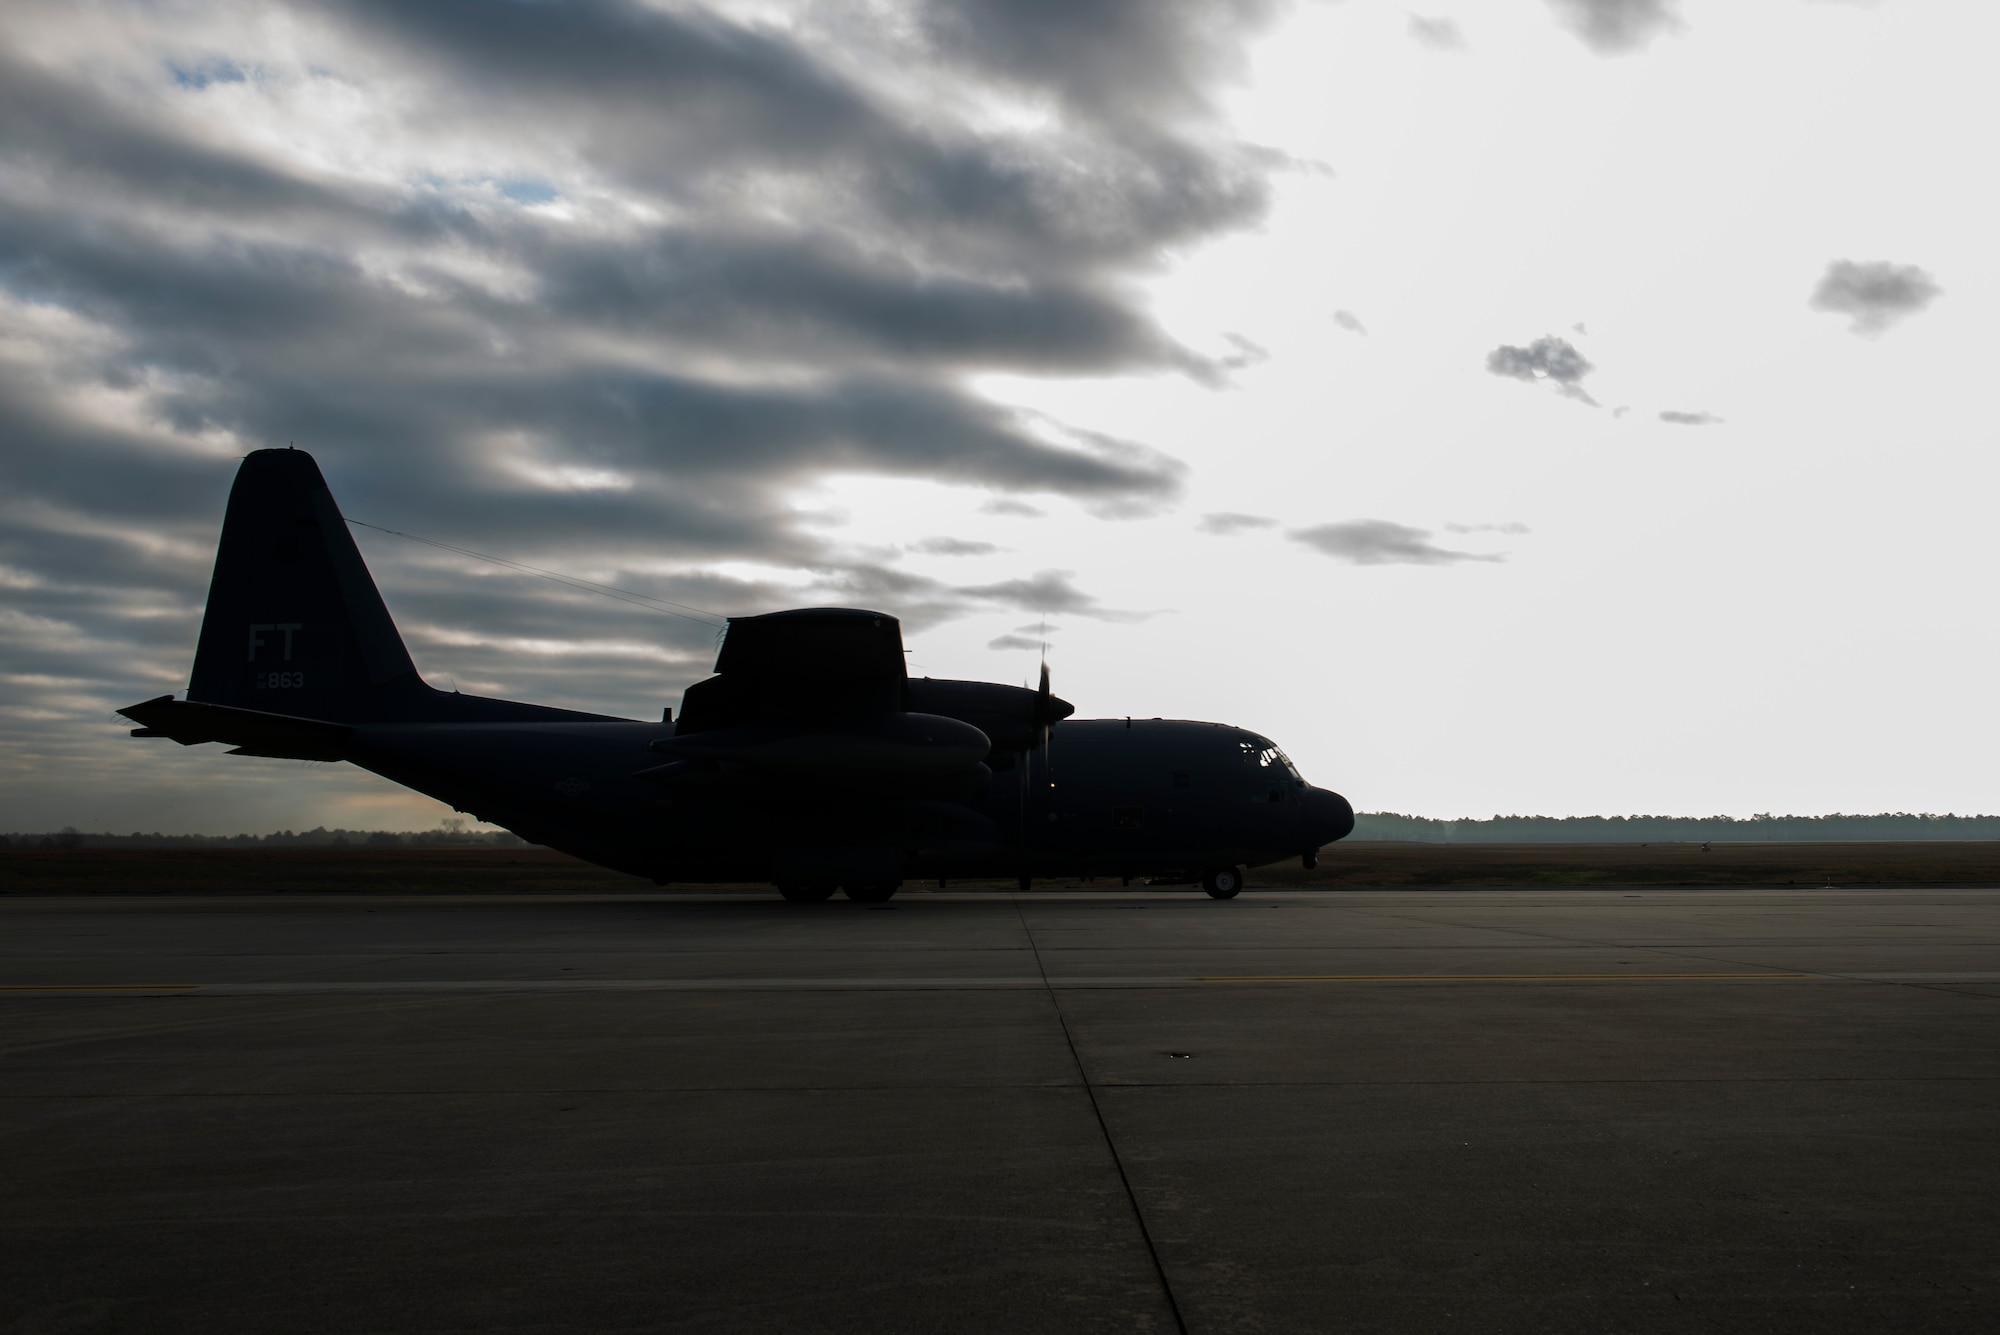 Aircraft 62-1863 ‘Iron Horse’, an HC-130P Combat King, taxis on the flightline before takeoff Mar. 3, 2015, at Moody Air Force Base, Ga. After 52 years of service, Iron Horse is taking its final flight before retiring to the “boneyard” in Davis-Monthan AFB, Ariz. (U.S. Air Force photo/Airman 1st Class Dillian Bamman)